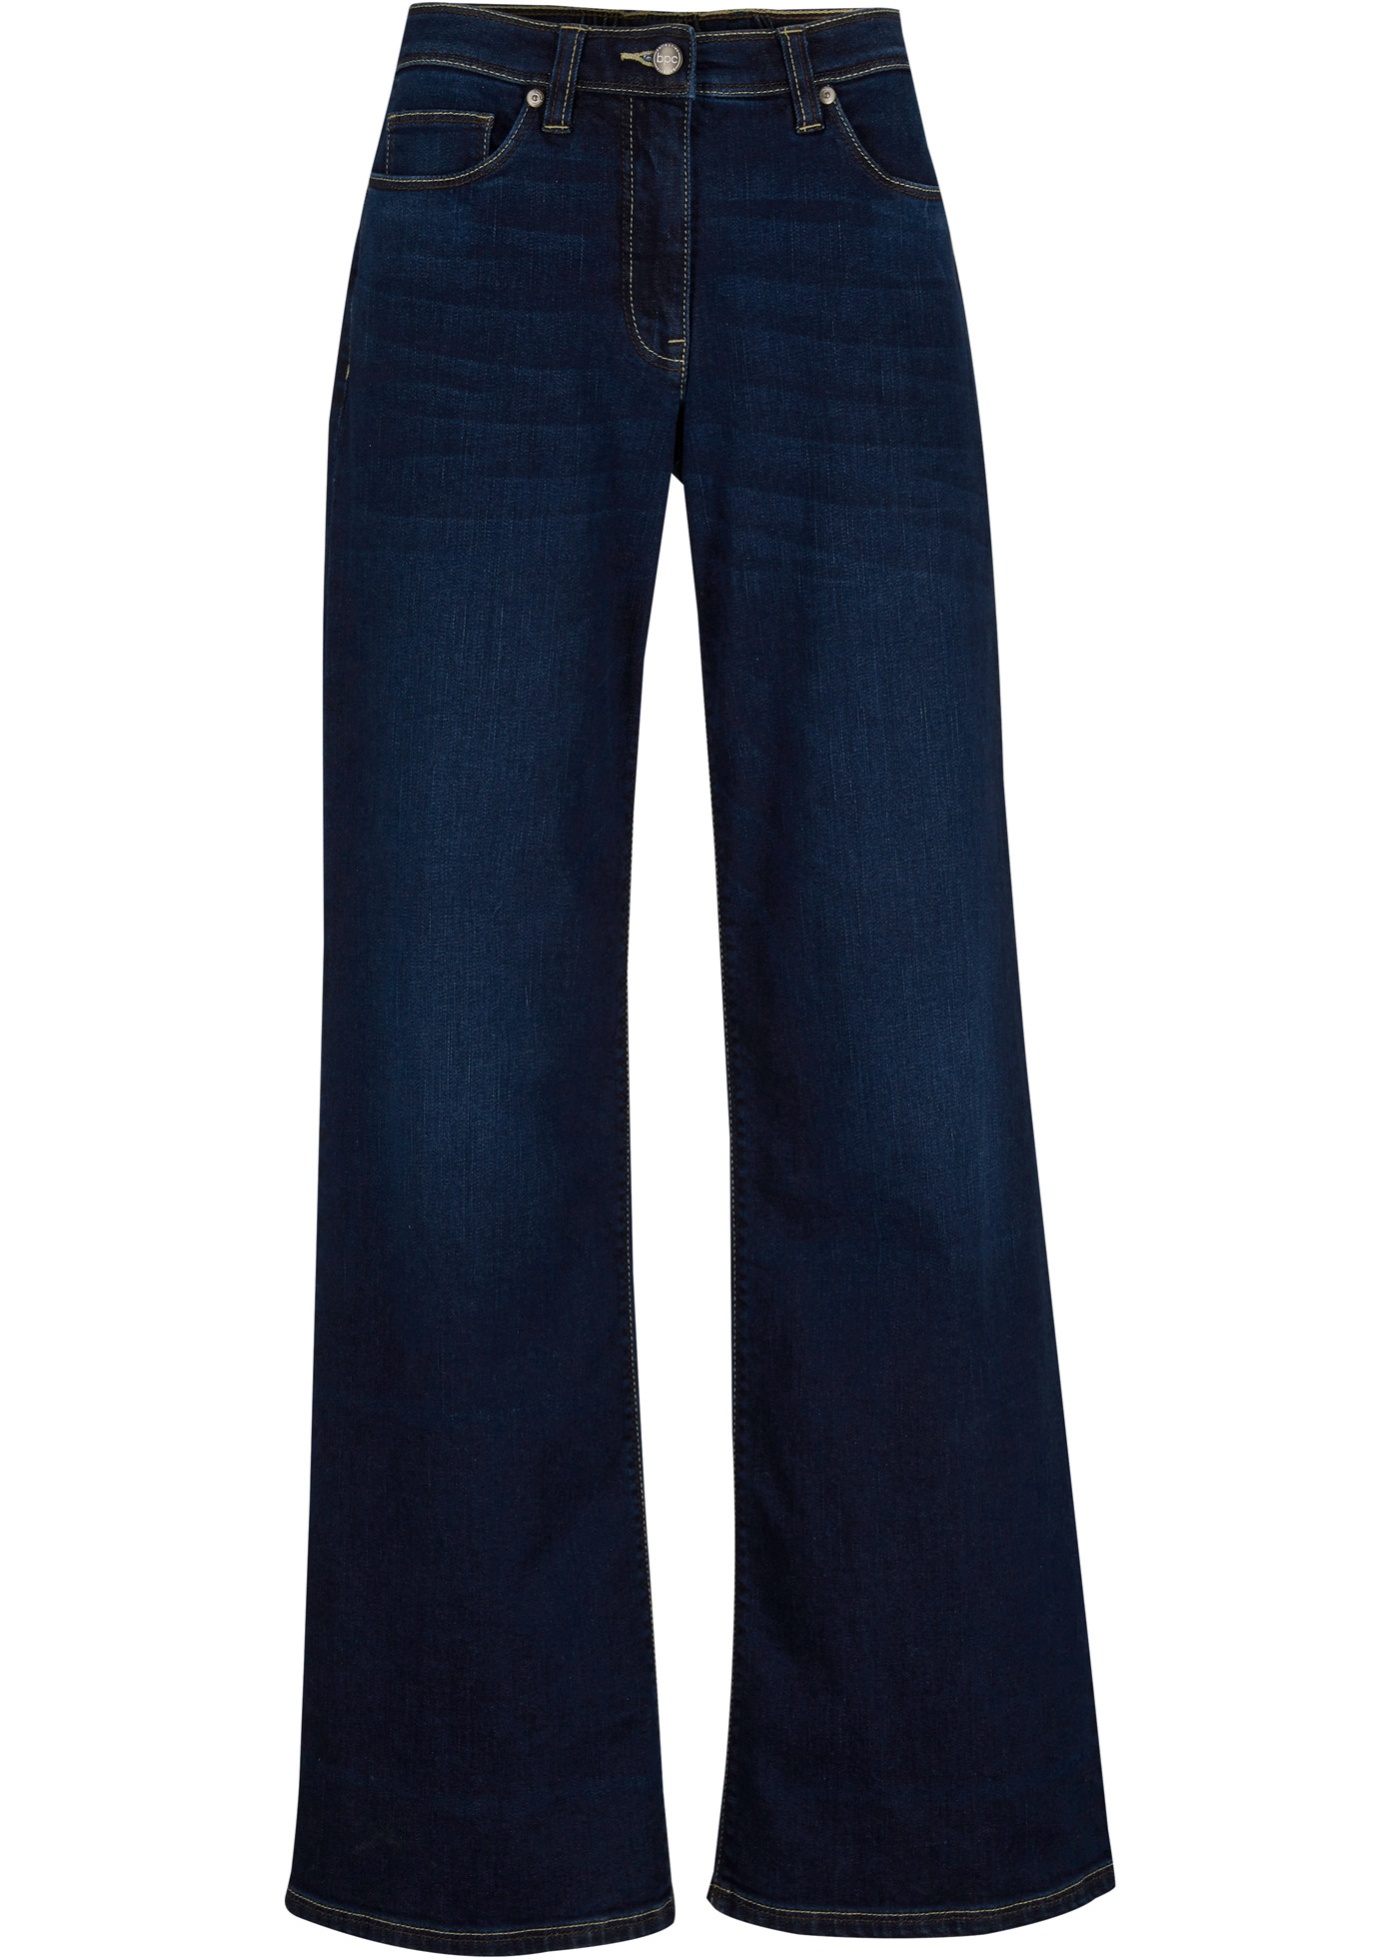 Jean extensible avec taille confortable, jambes extra larges